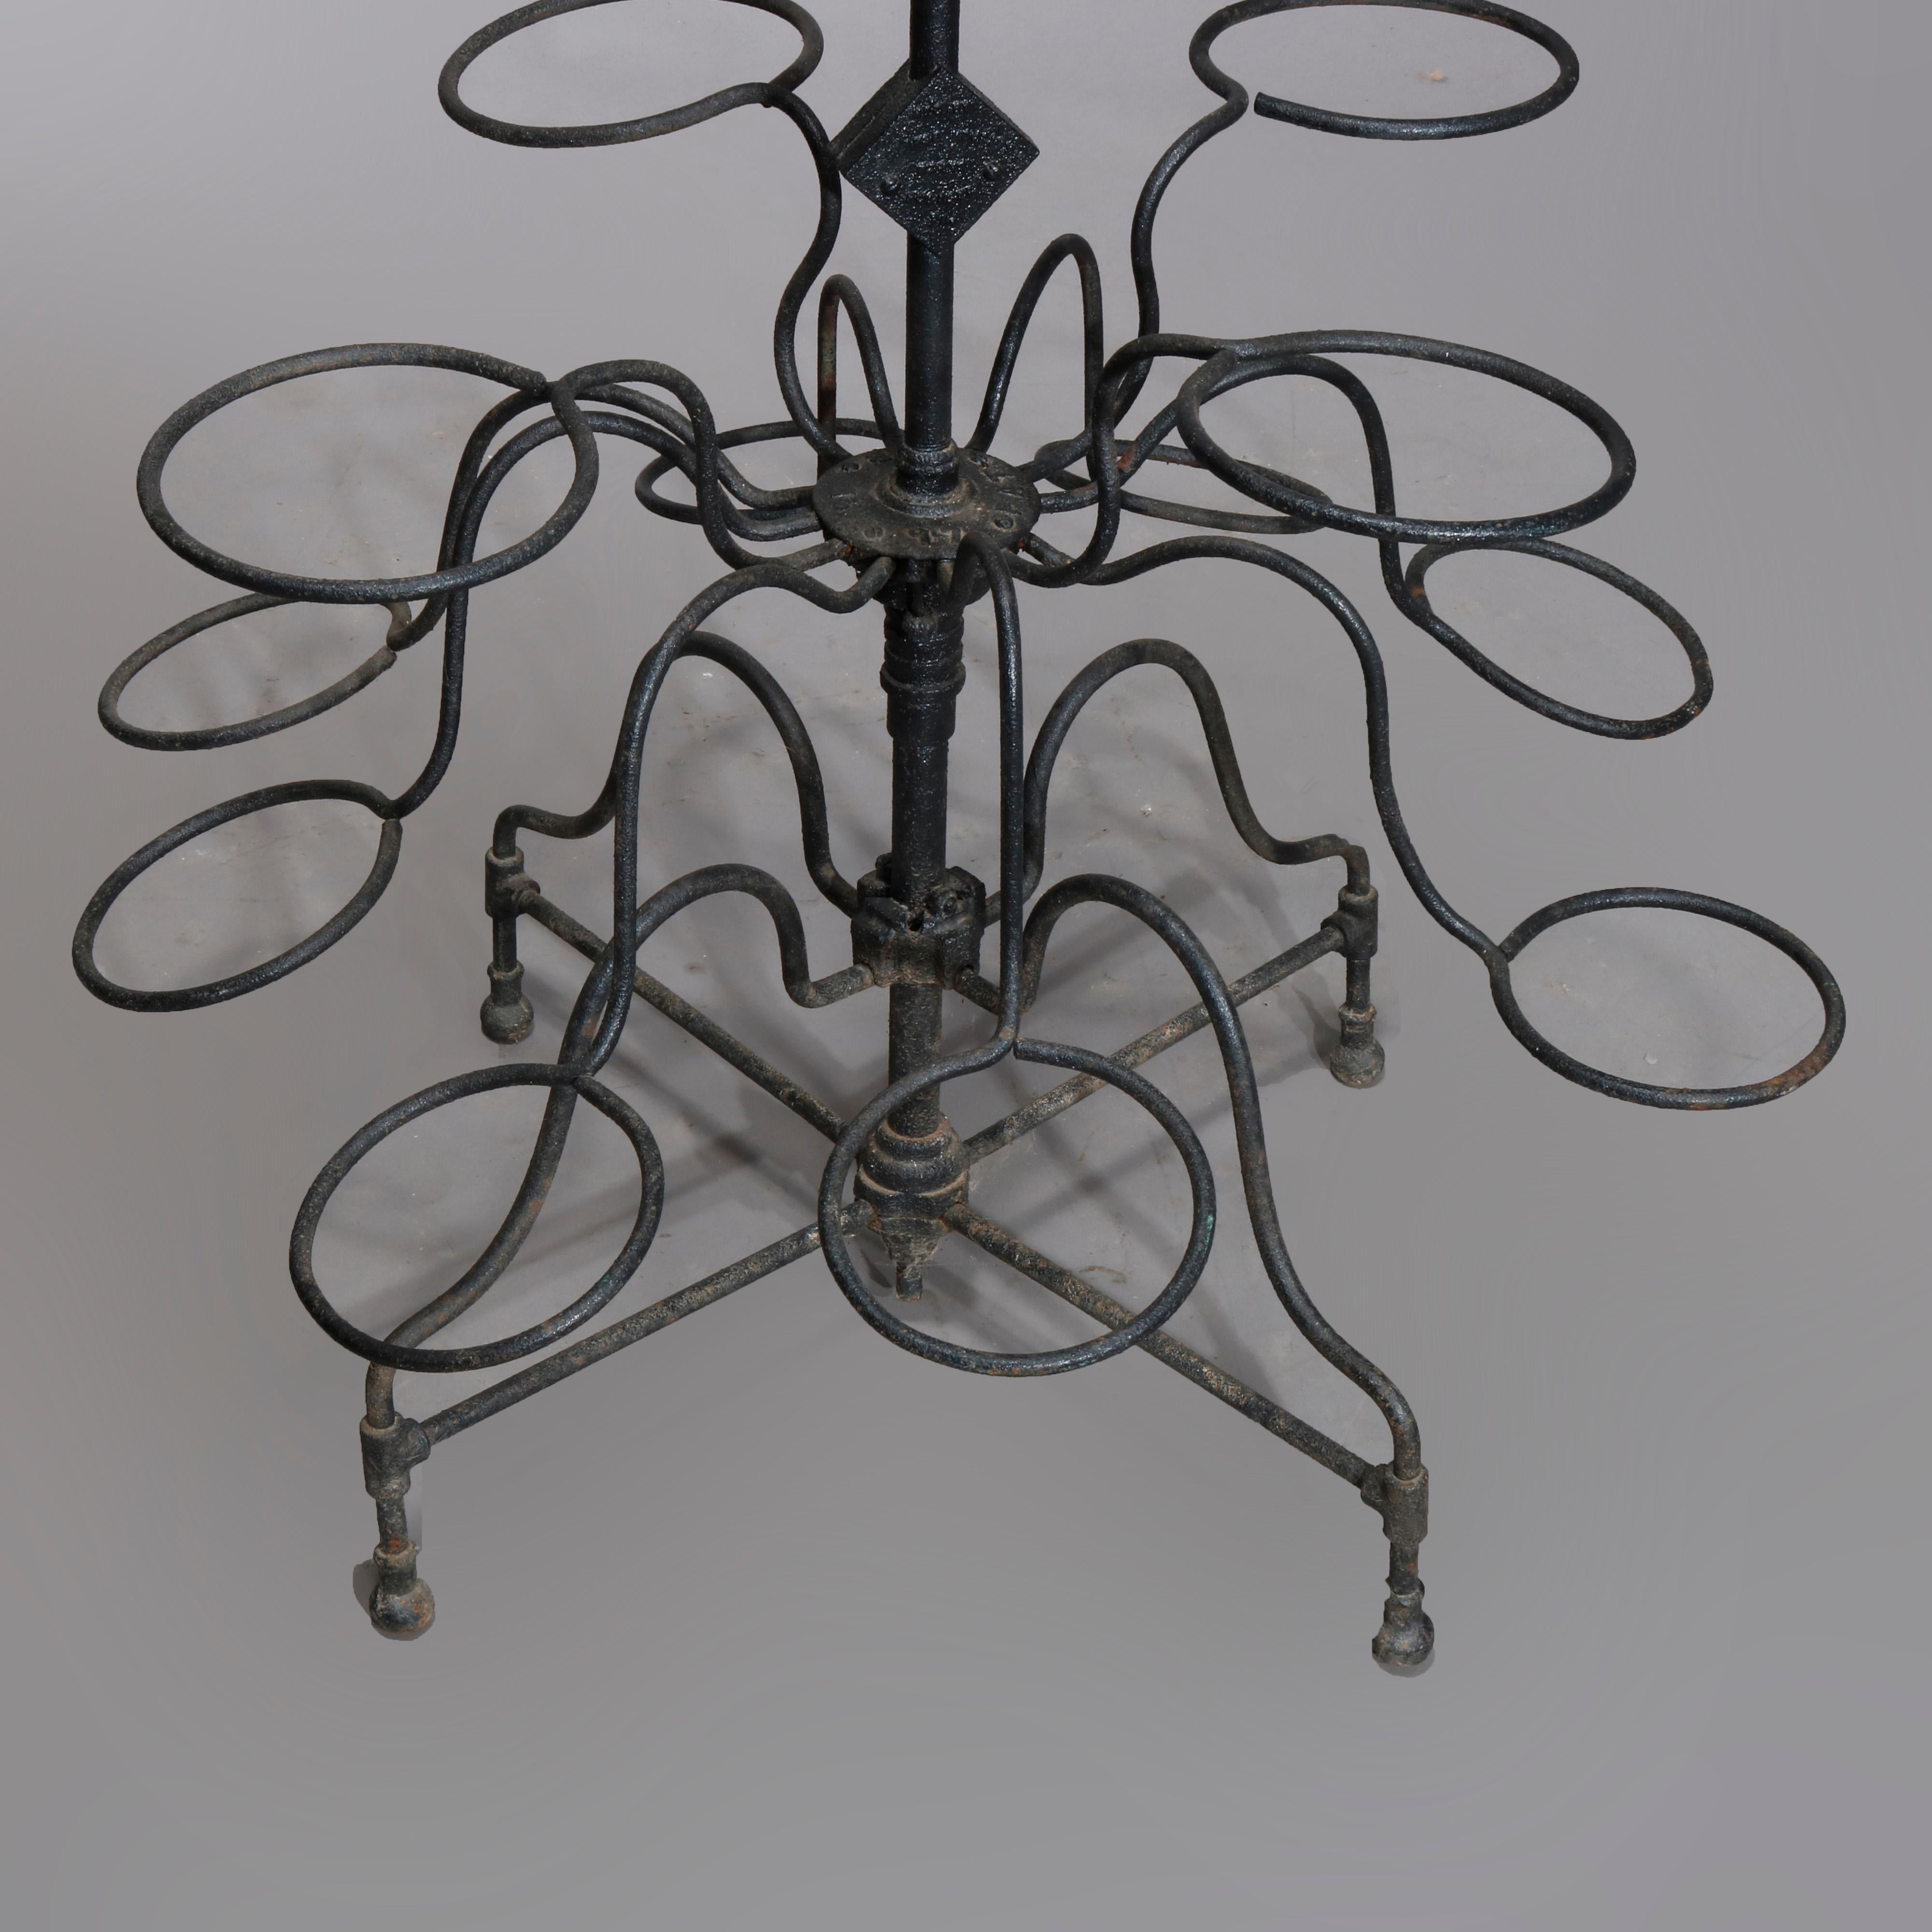 American Antique Tiered Wrought Iron Patio Garden Plant Display Stand, circa 1890